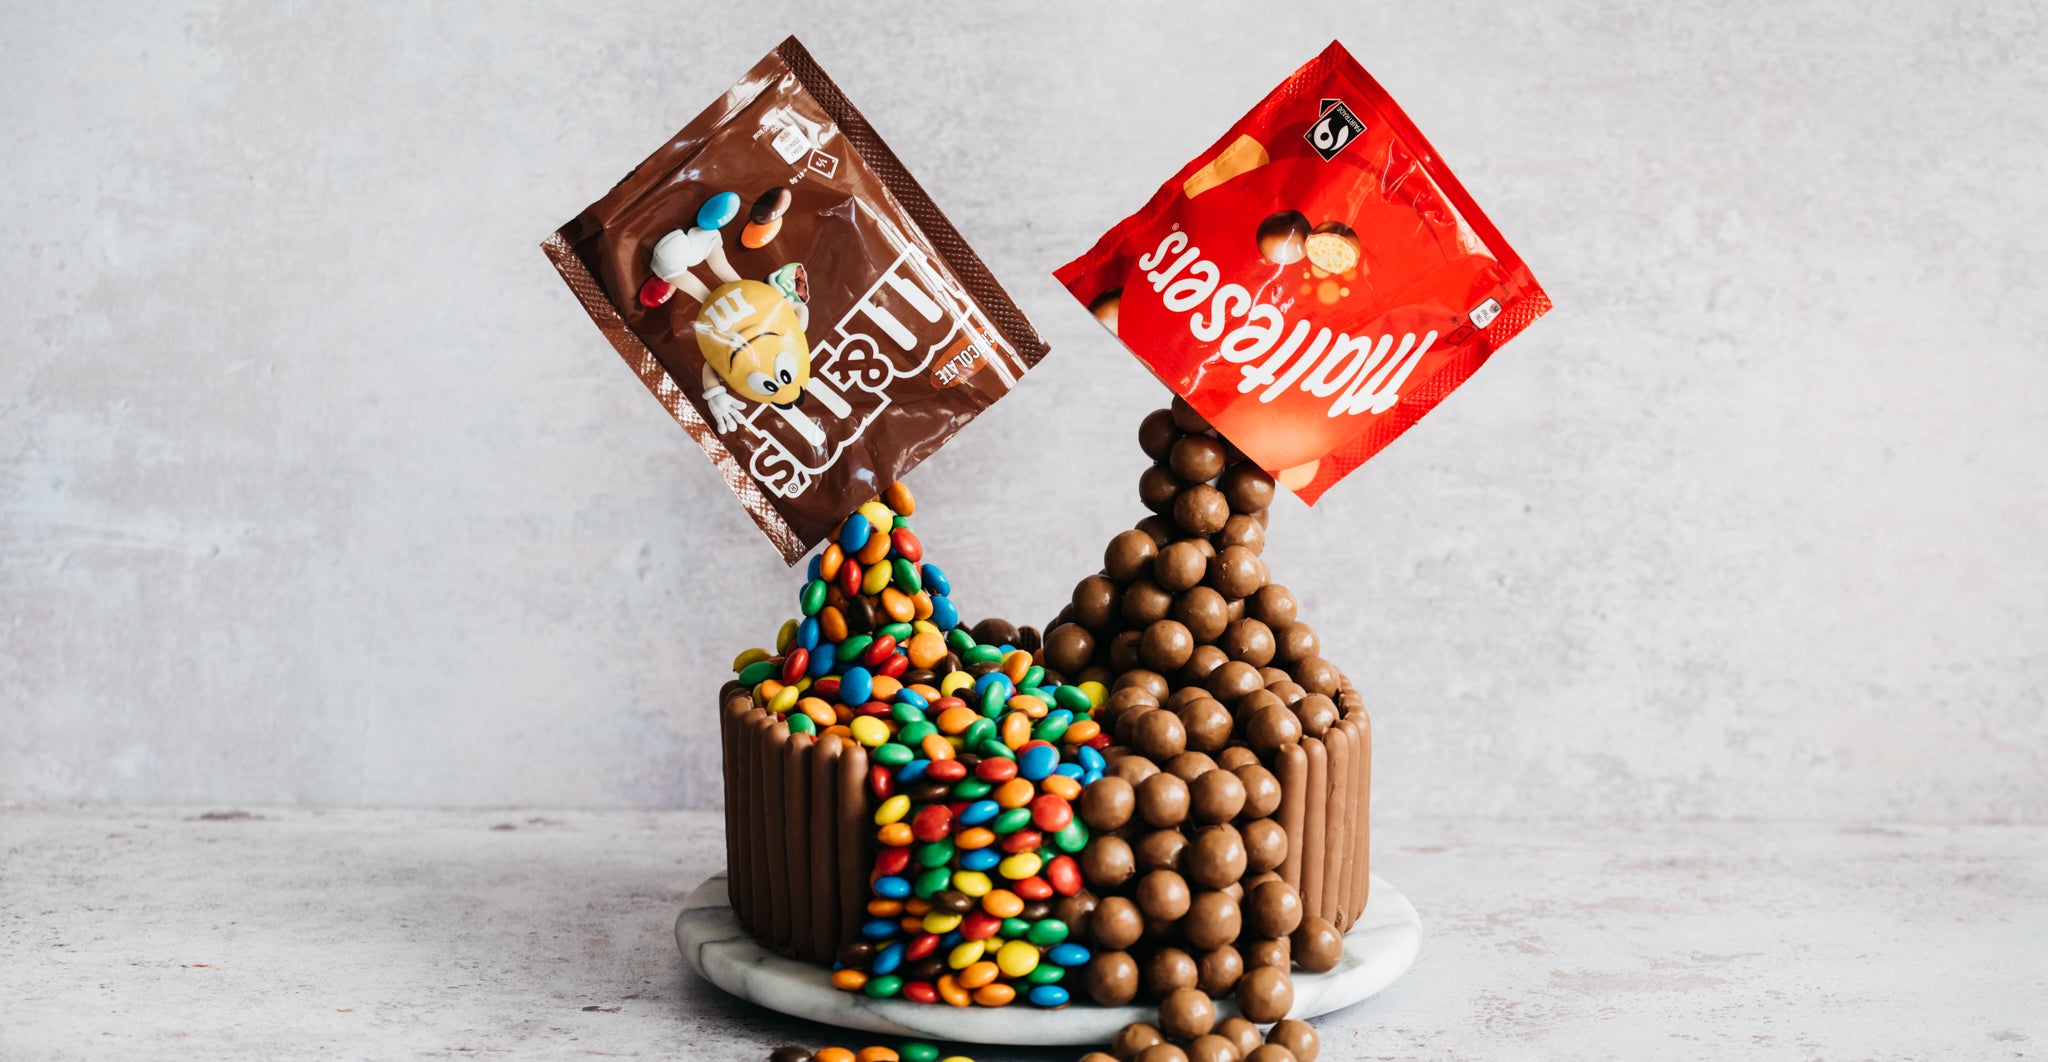 Chocolate Showstopper Cake with a bag of M&M's and Maltesers defying gravity 